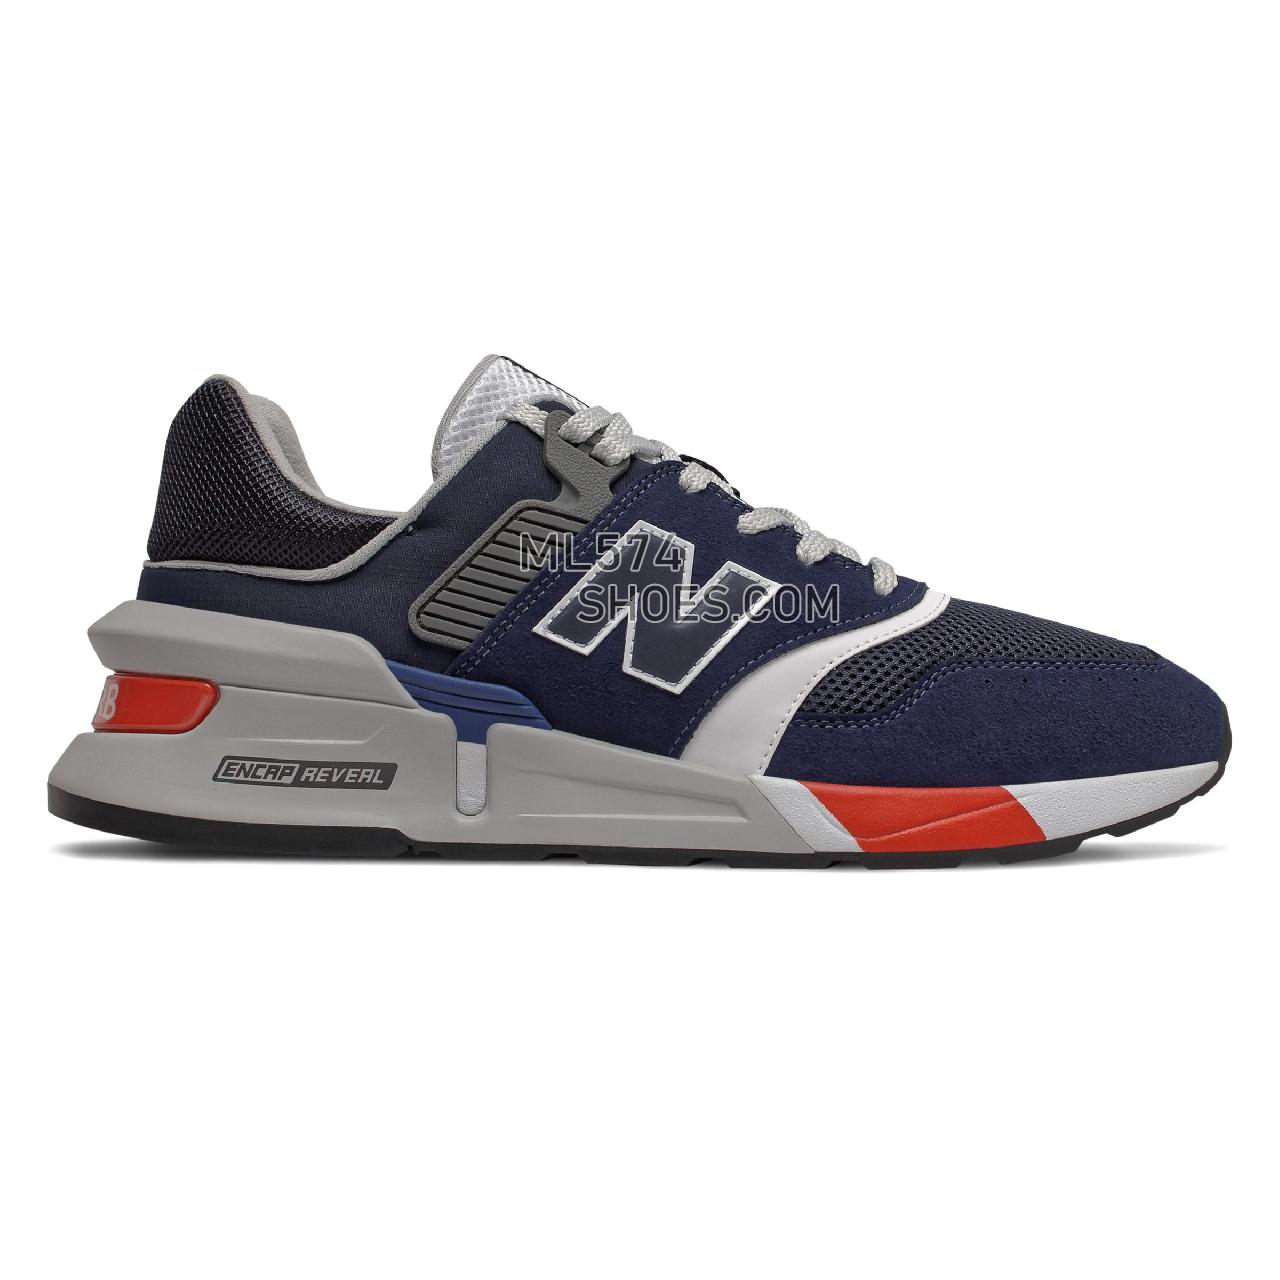 New Balance 997 Sport - Men's 997 Sport Classic - Pigment with Munsell White - MS997LOT